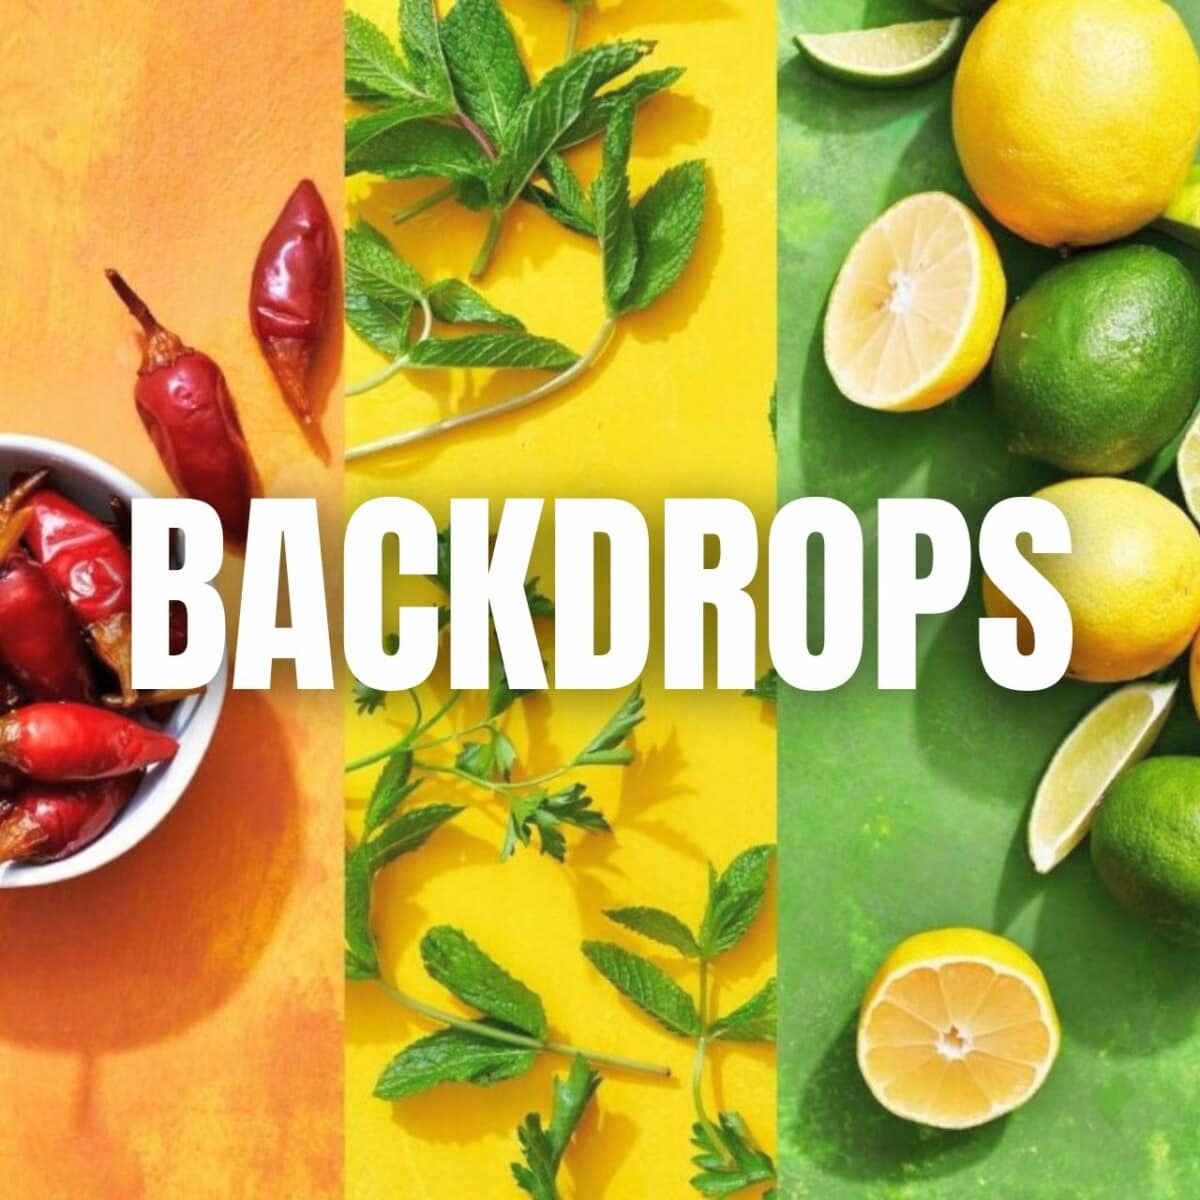 DIY Food Photography Backdrops | UPDATED!